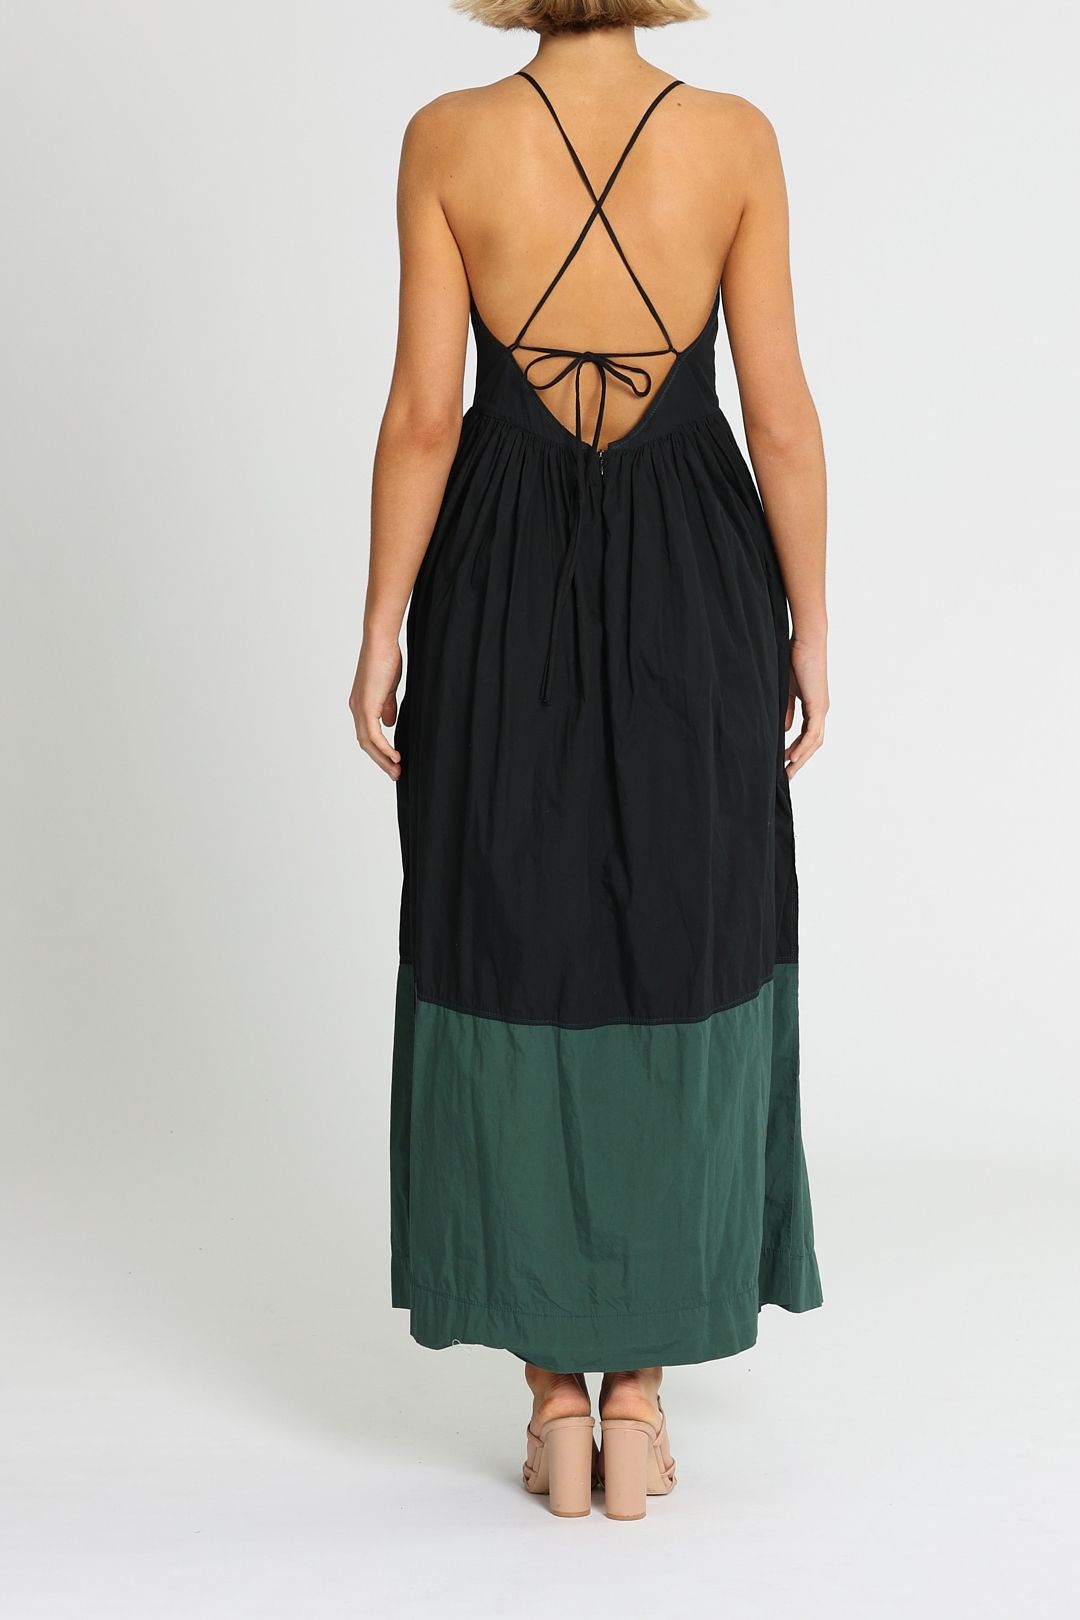 Bassike Knotted Maxi Dress Backless